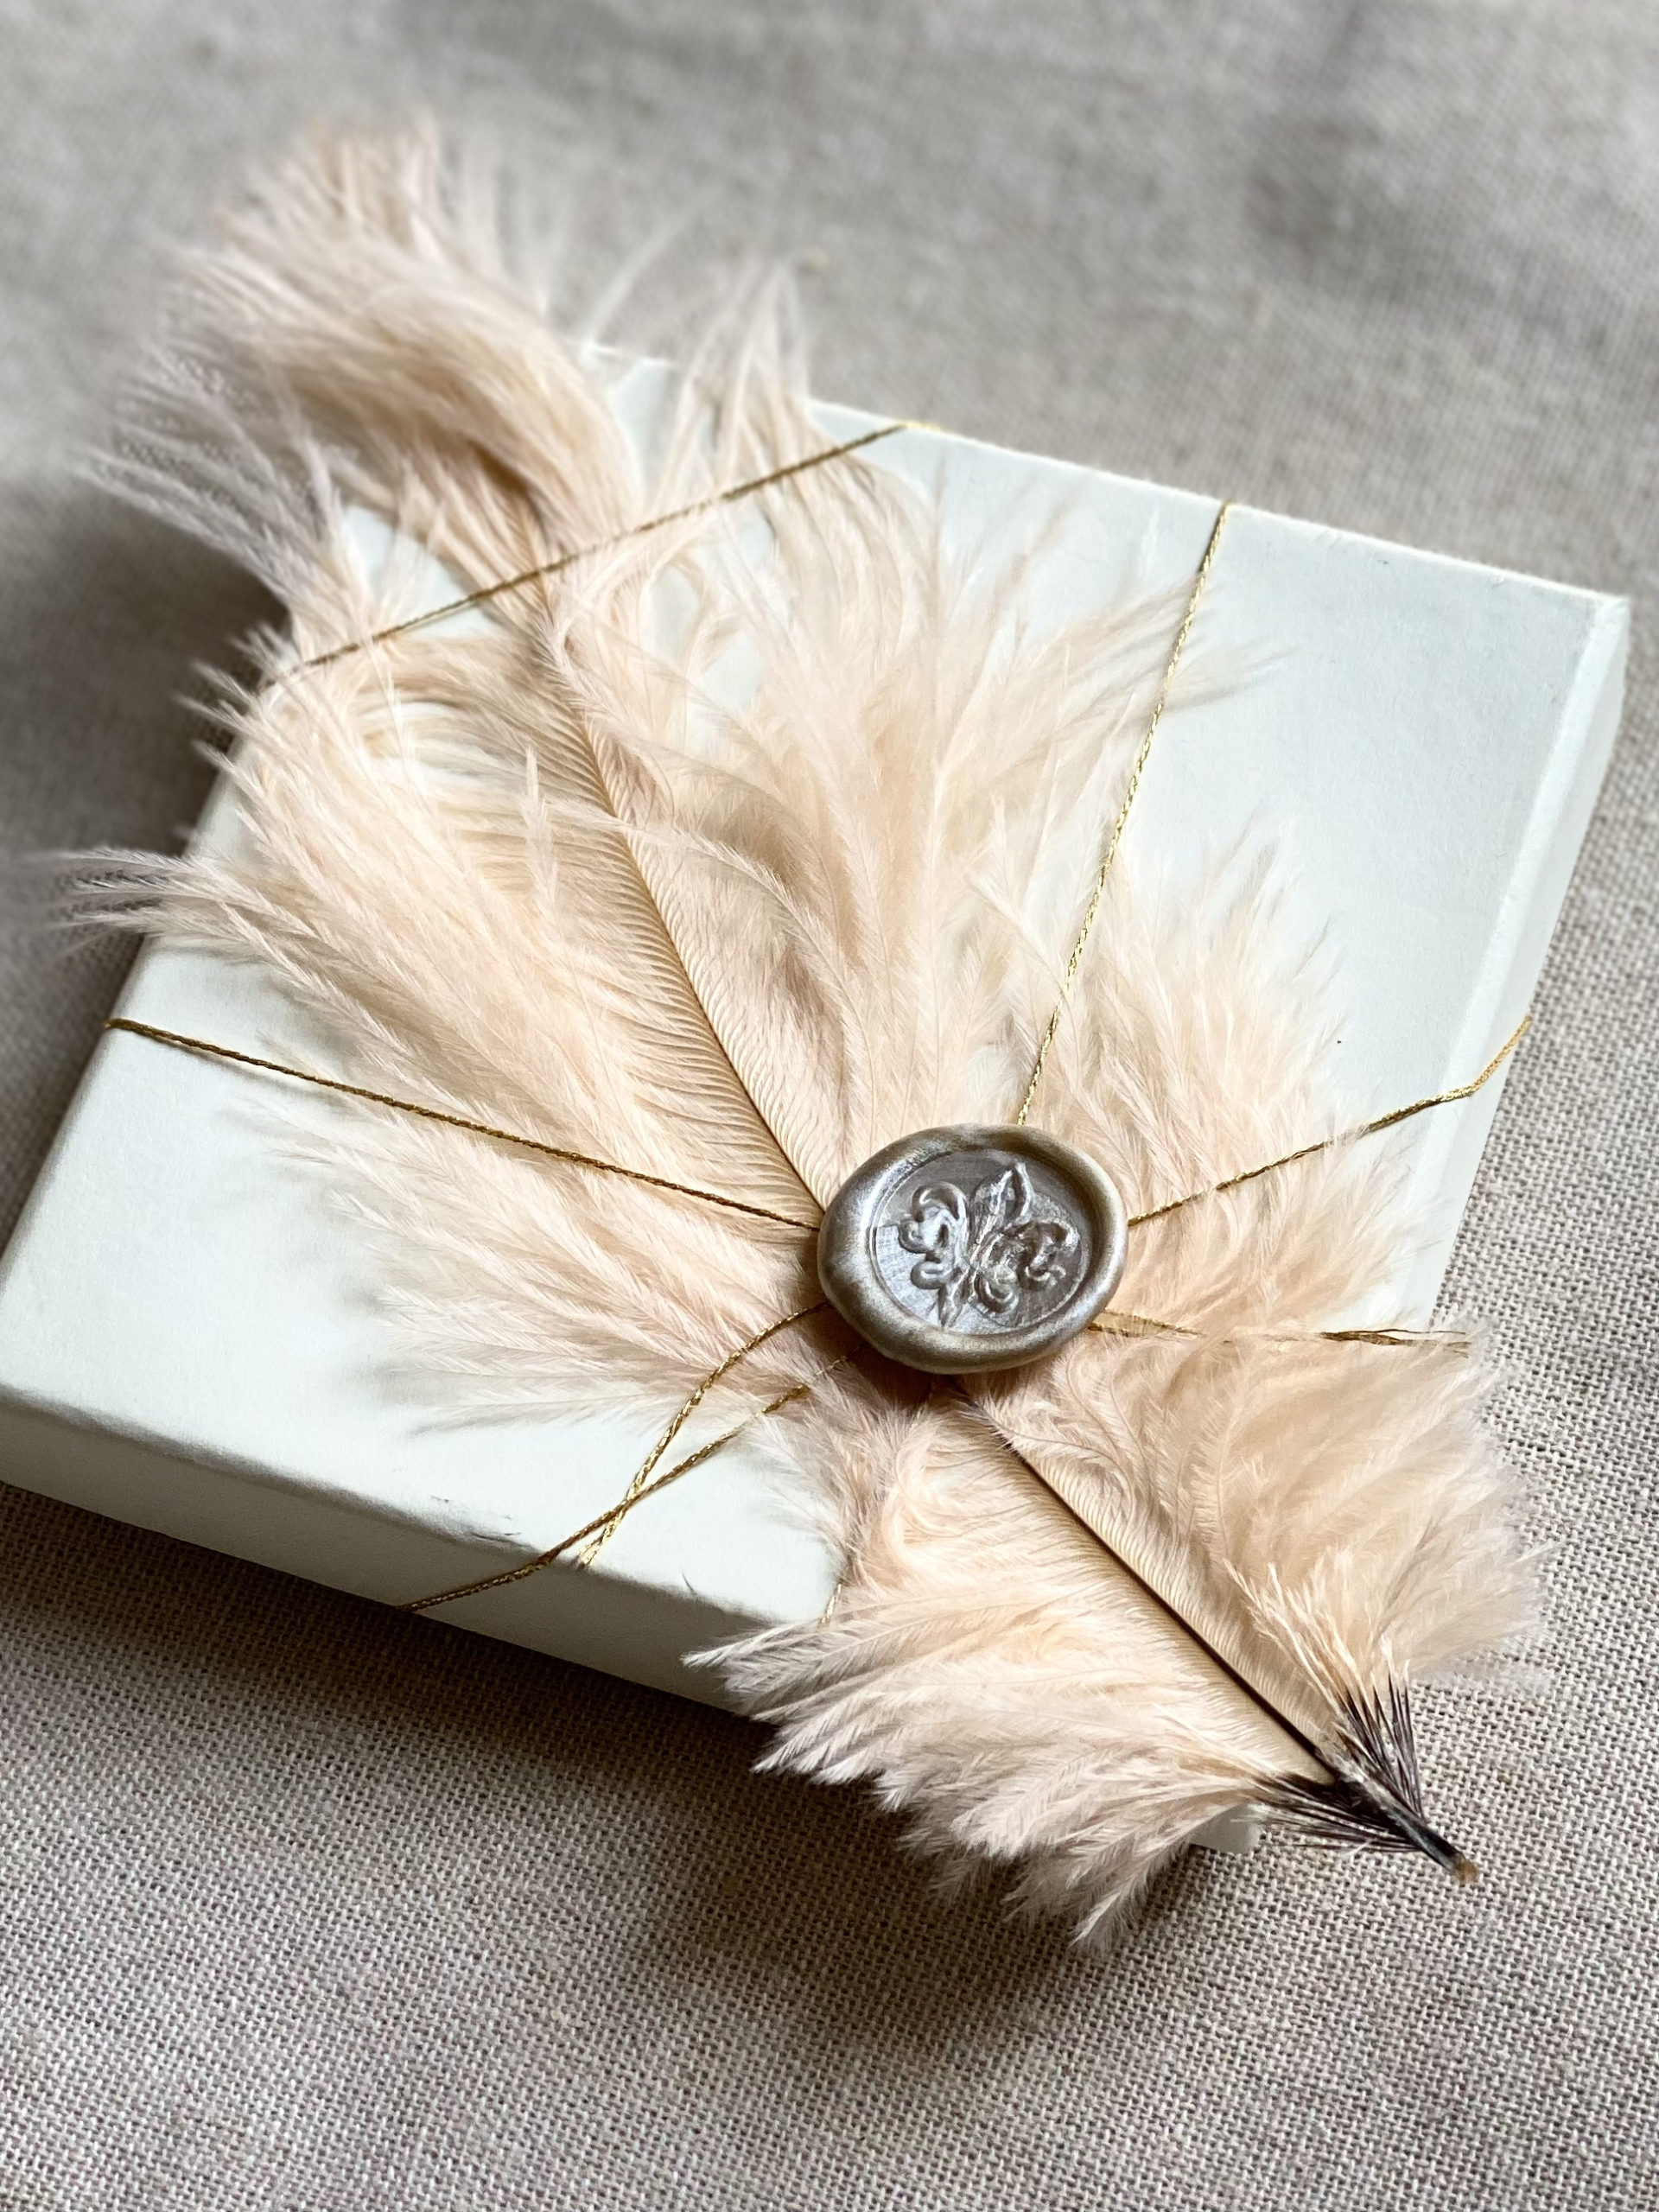 salmon-feather-wedding-favor-box-with-wax-seal-stamp